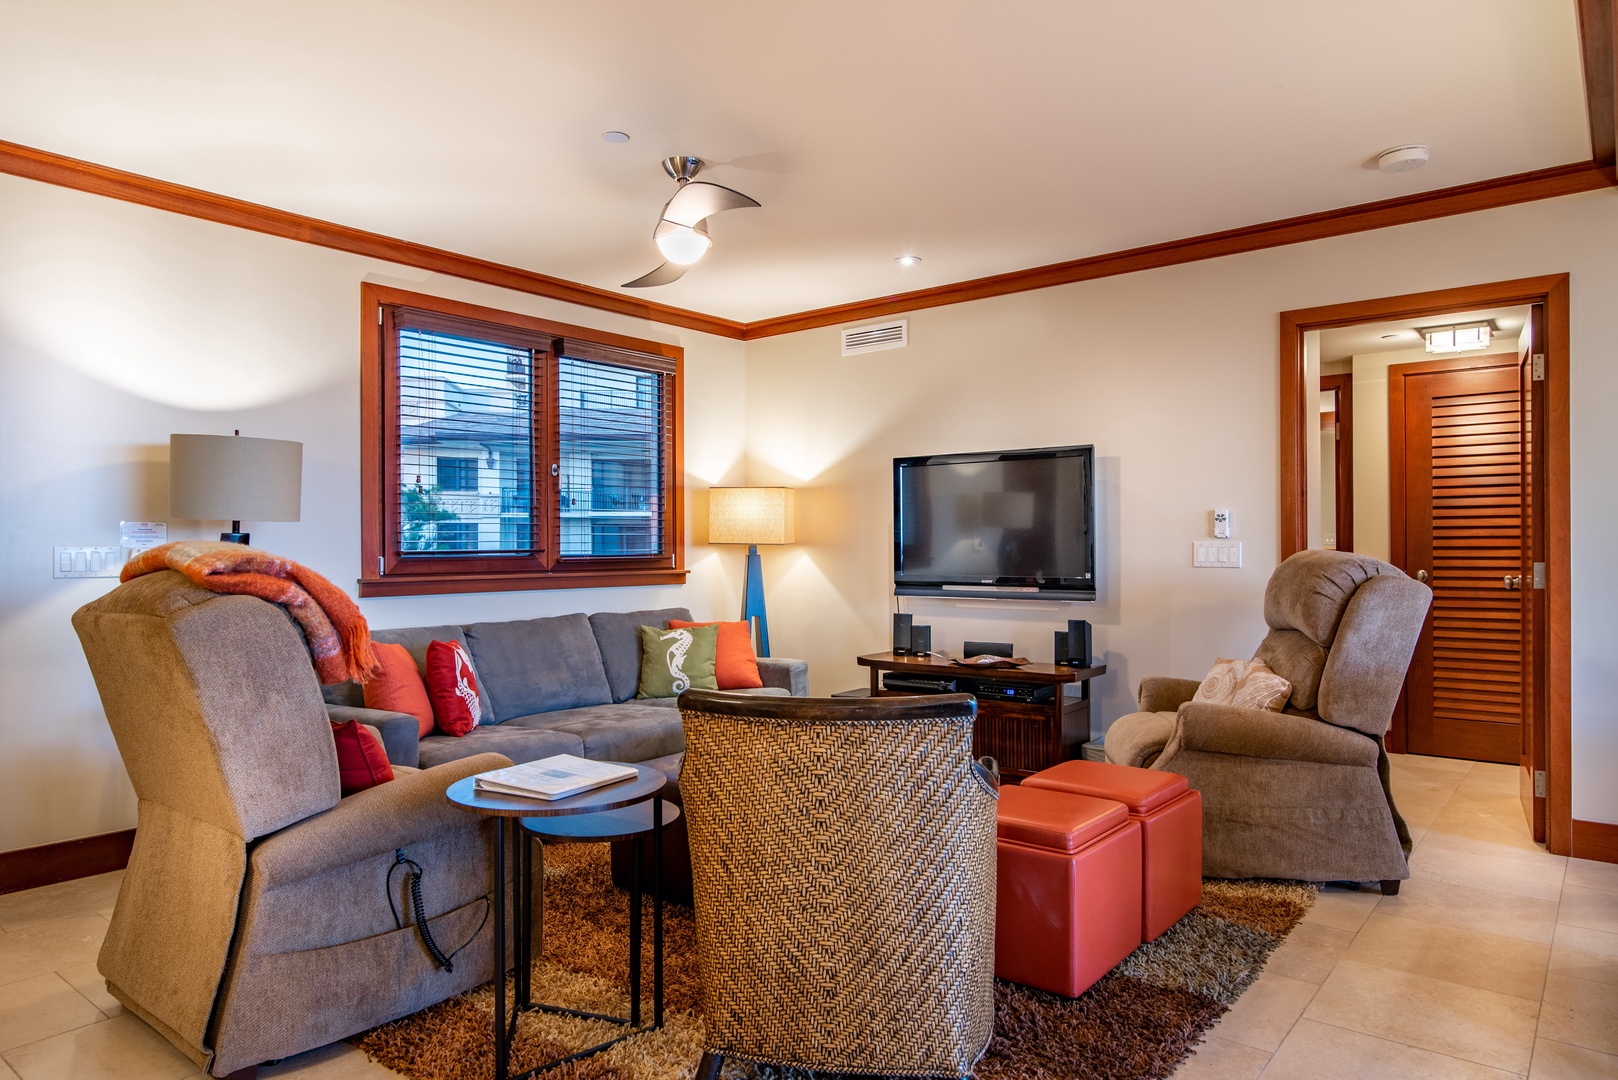 Kapolei Vacation Rentals, Ko Olina Beach Villas B301 - The living room area is perfect for curling up with a book or entertaining.